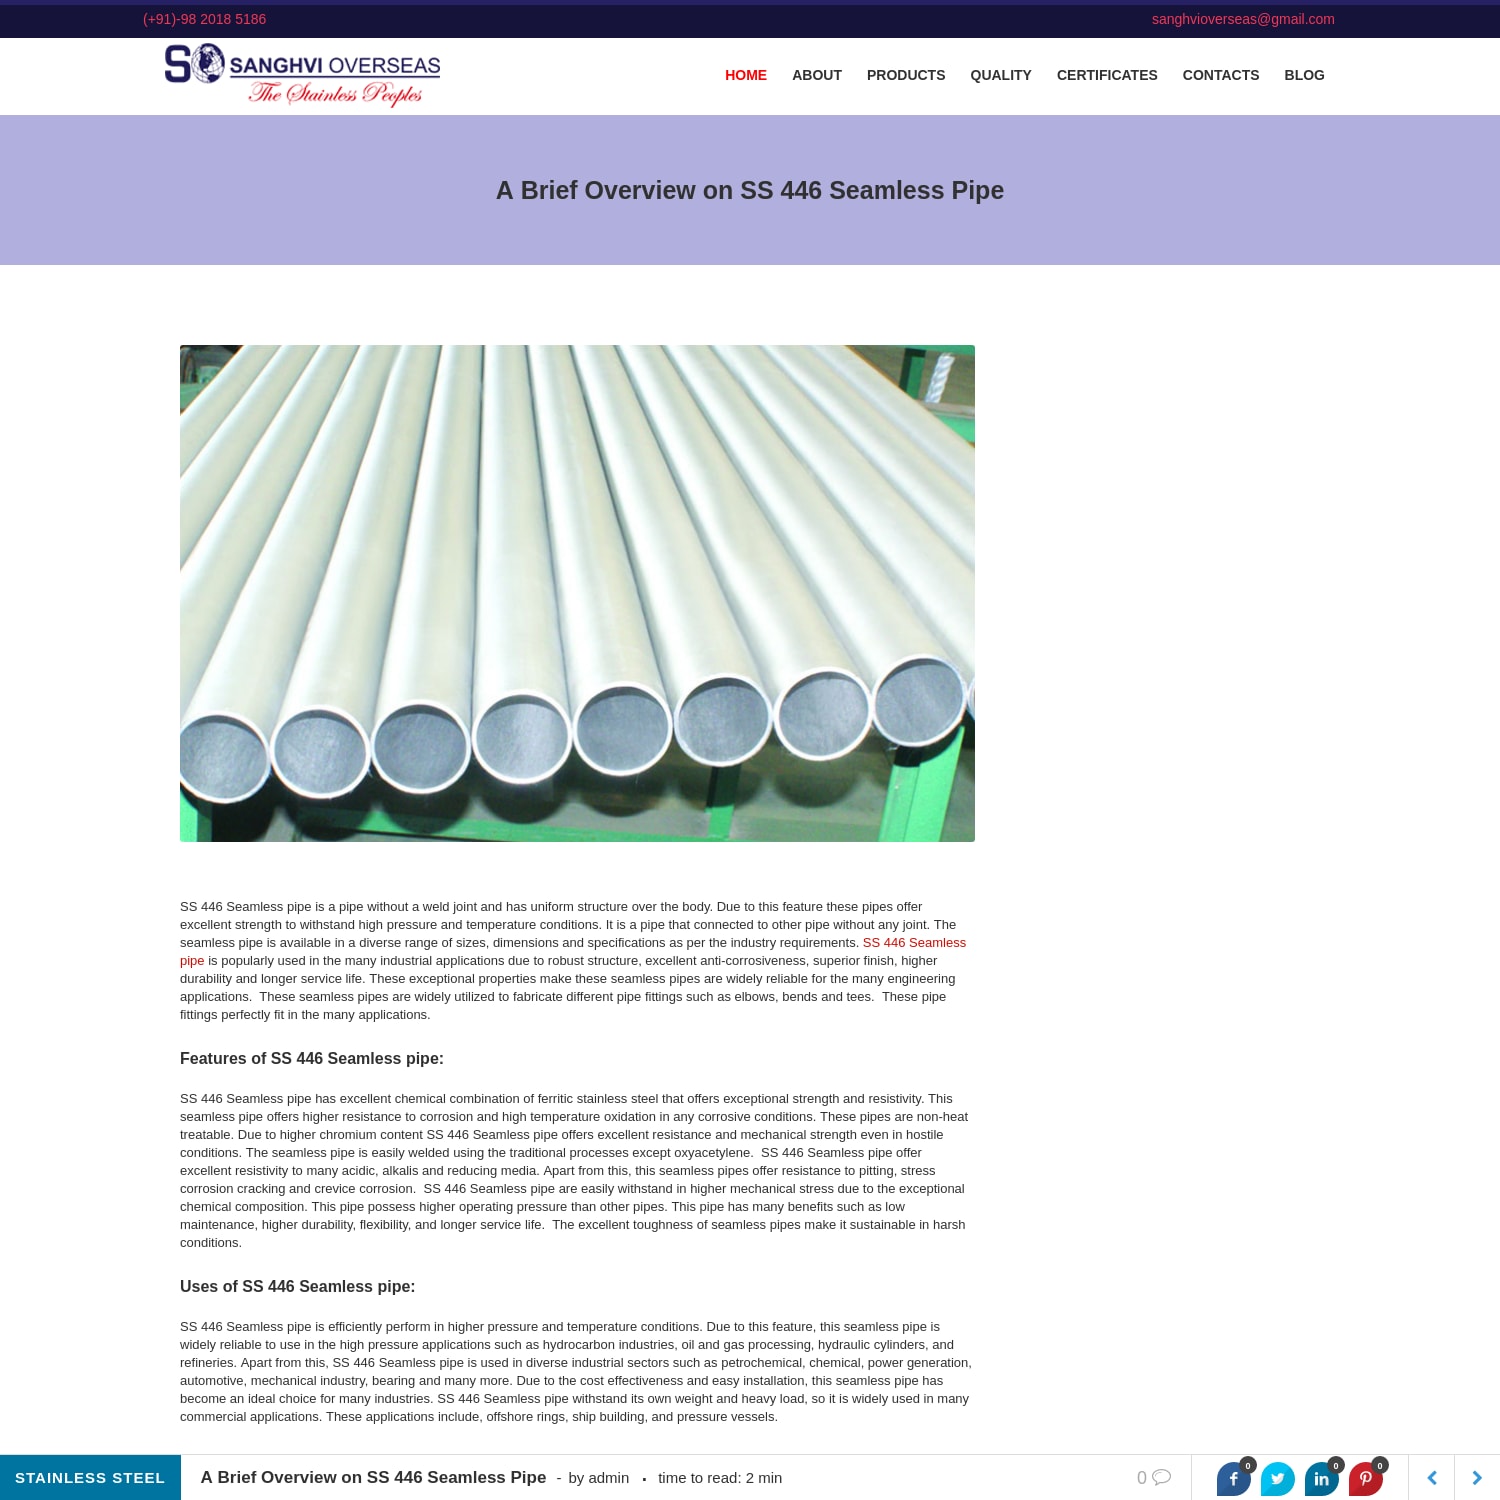 A Brief Overview on SS 446 Seamless Pipe - Sanghvi Overseas Blog